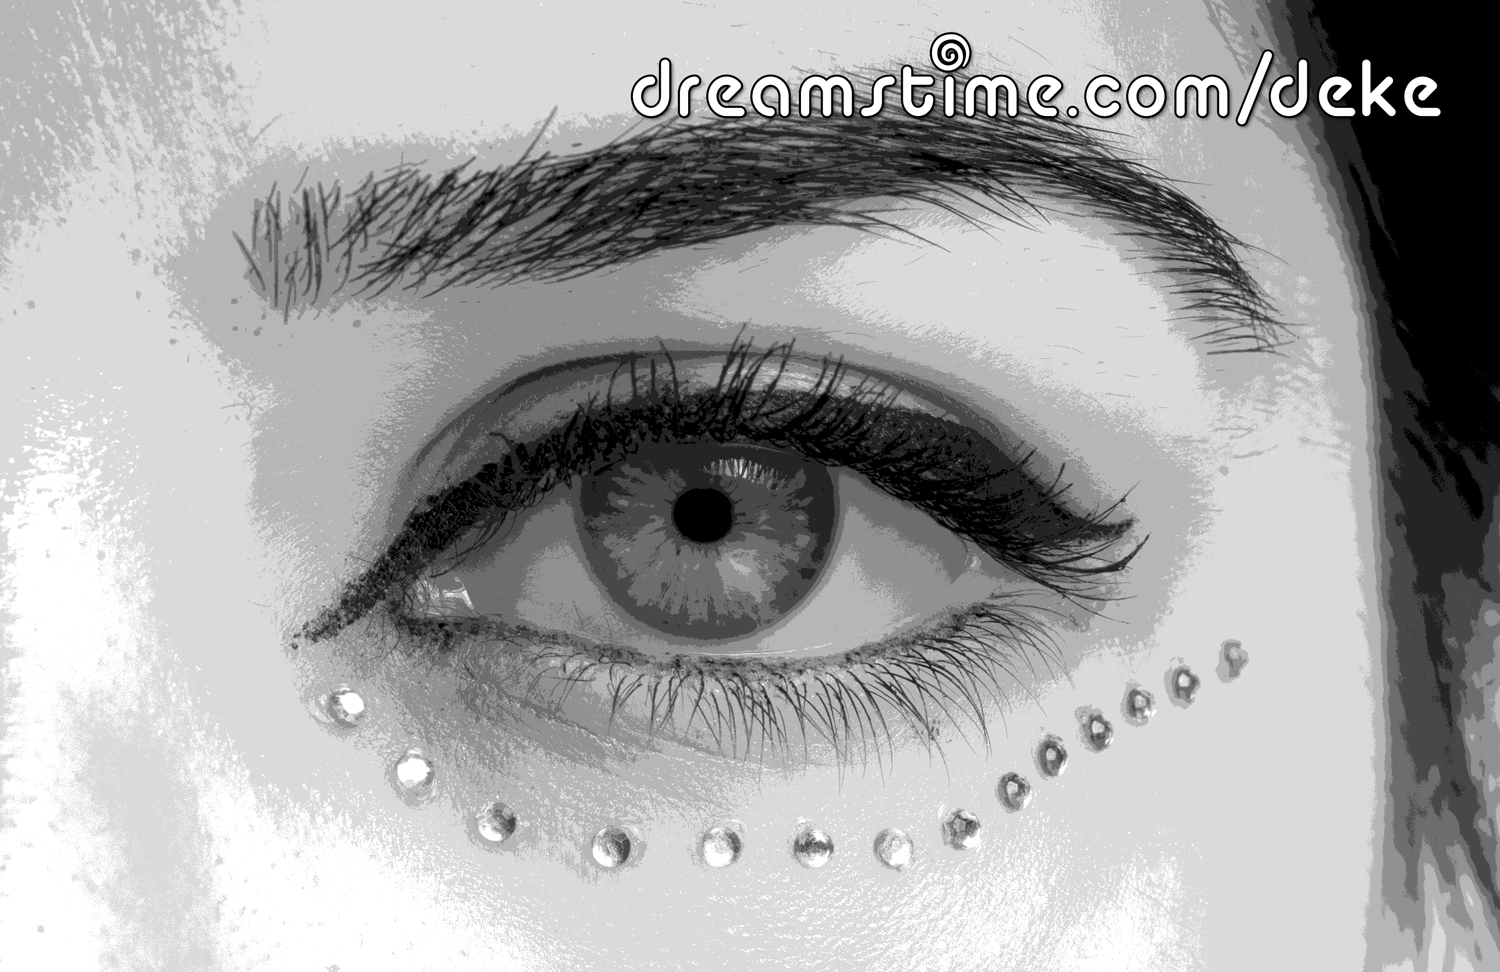 A posterized monochrome eyeball from Dreamstime